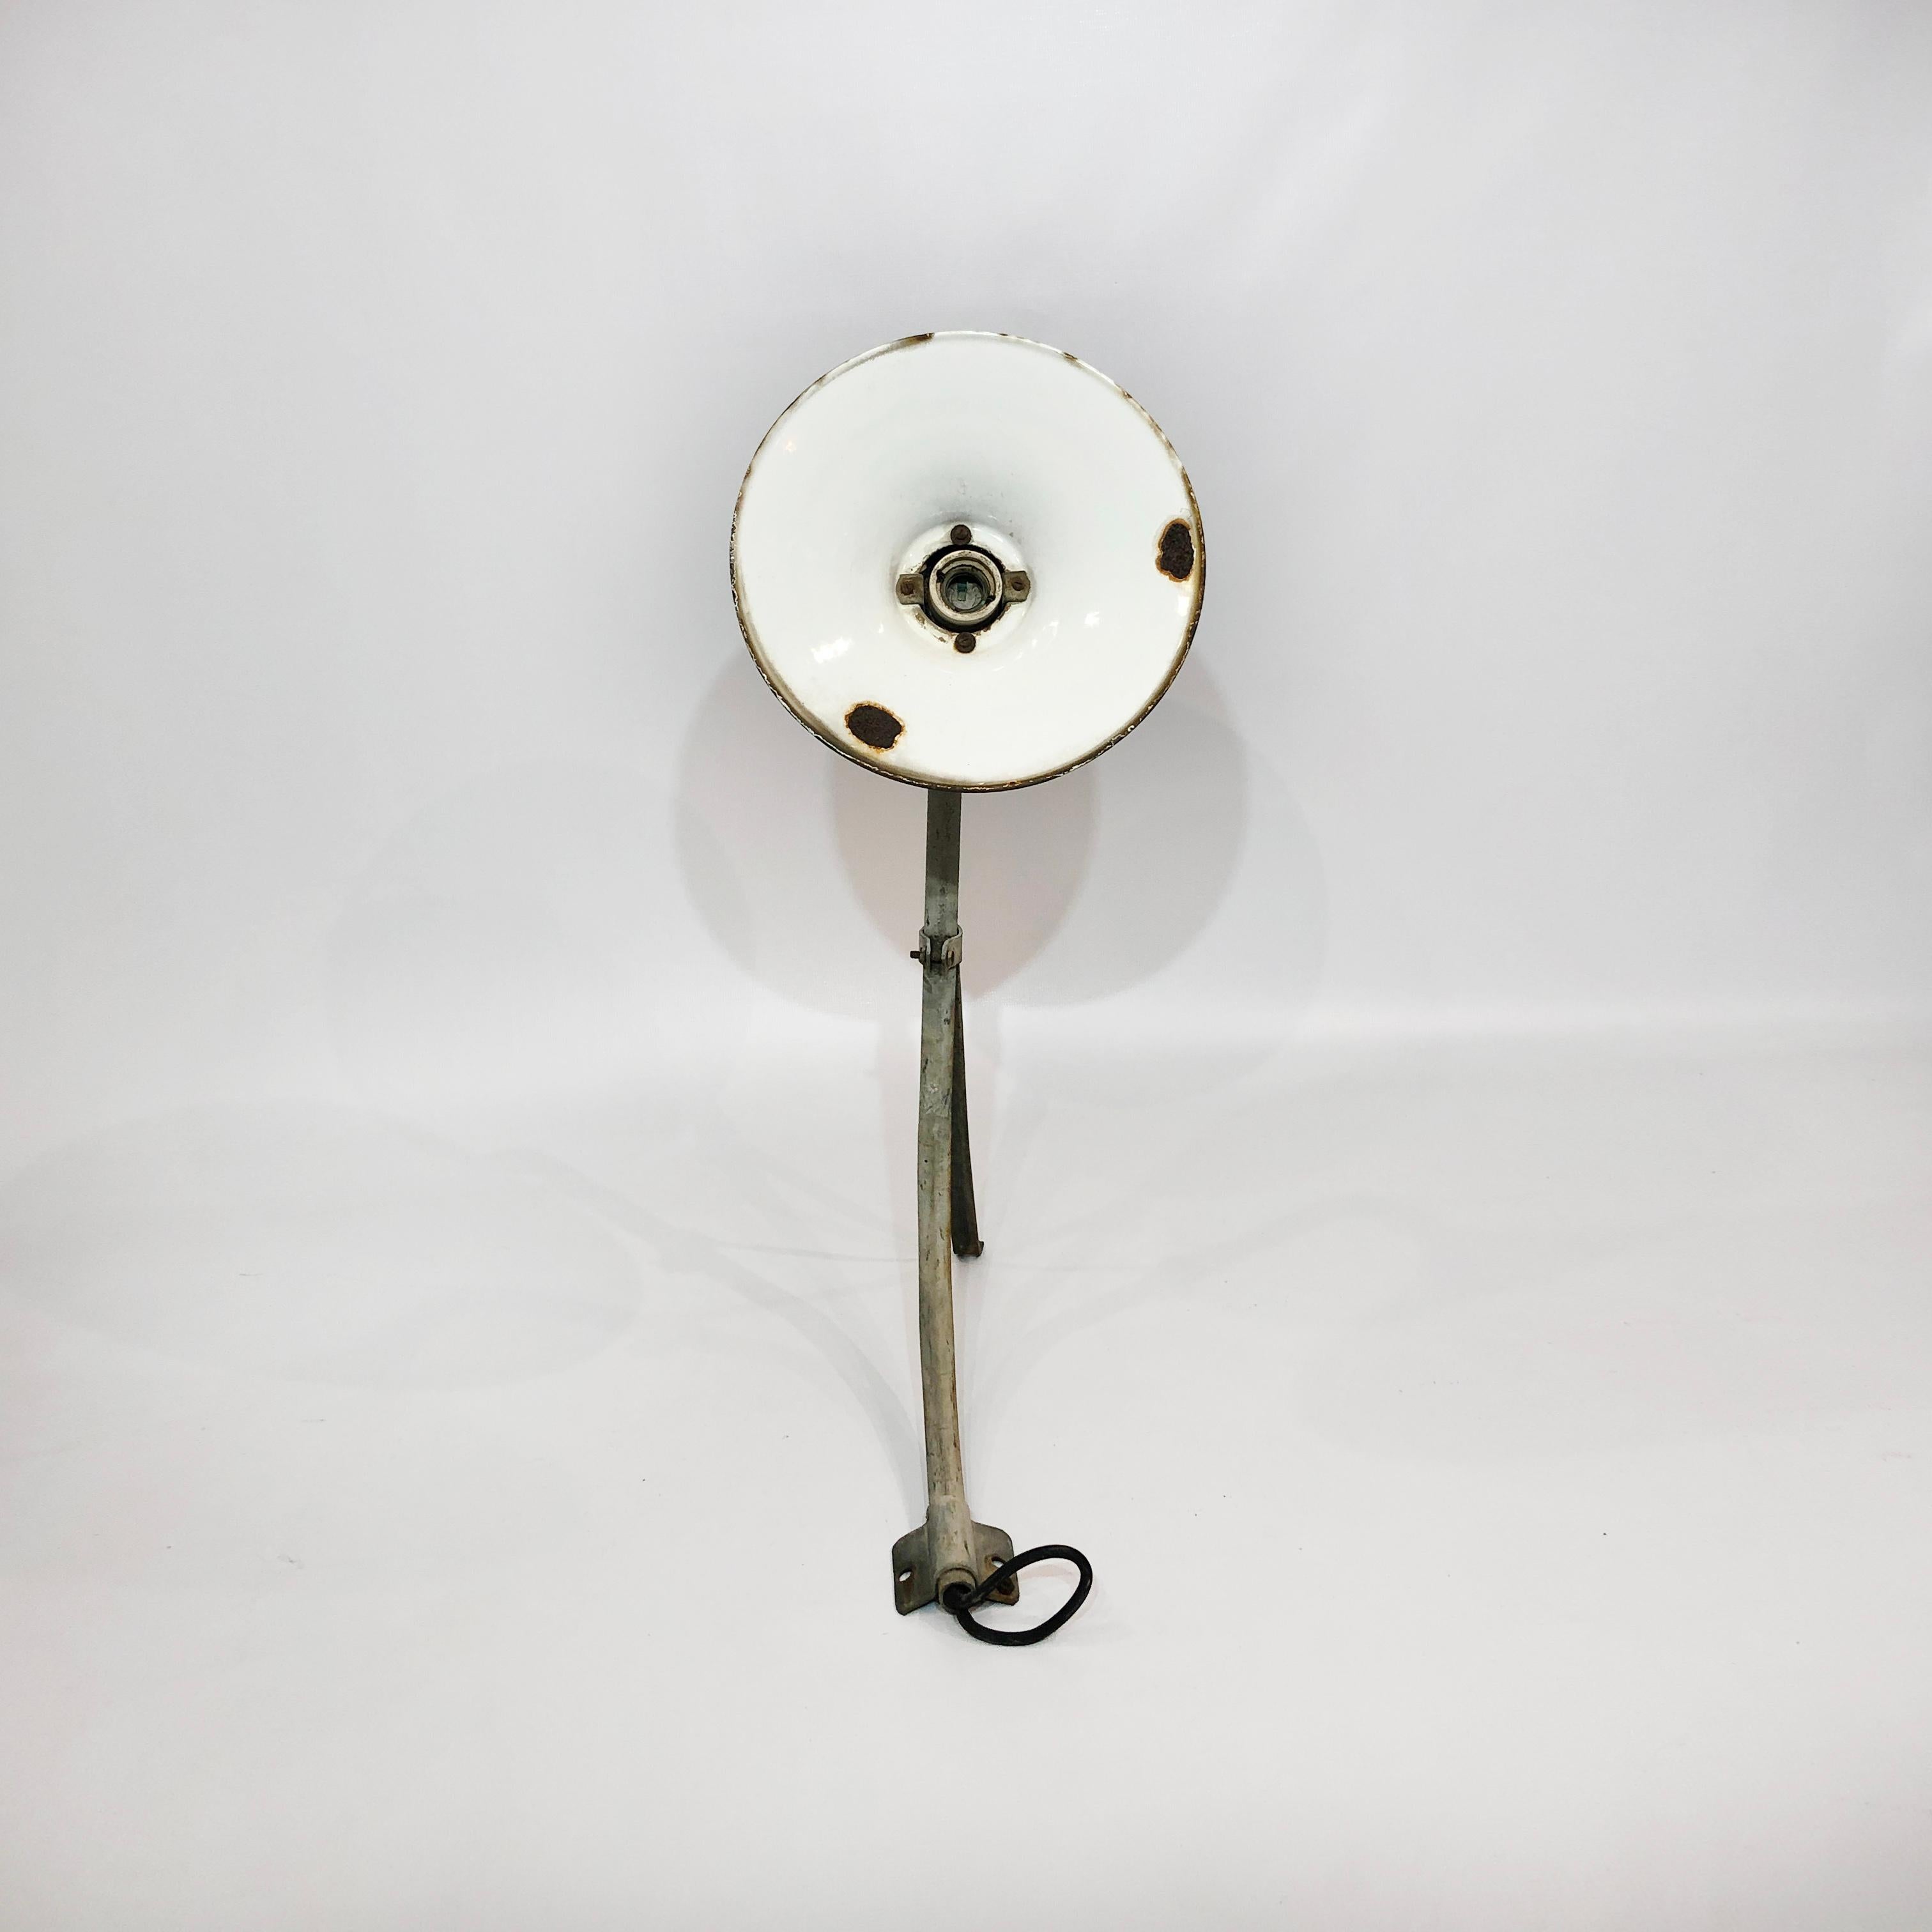 Large Industrial Wall Light 3 of 3 50s Vintage Retro Commercial Lighting Lamp In Good Condition For Sale In London, GB